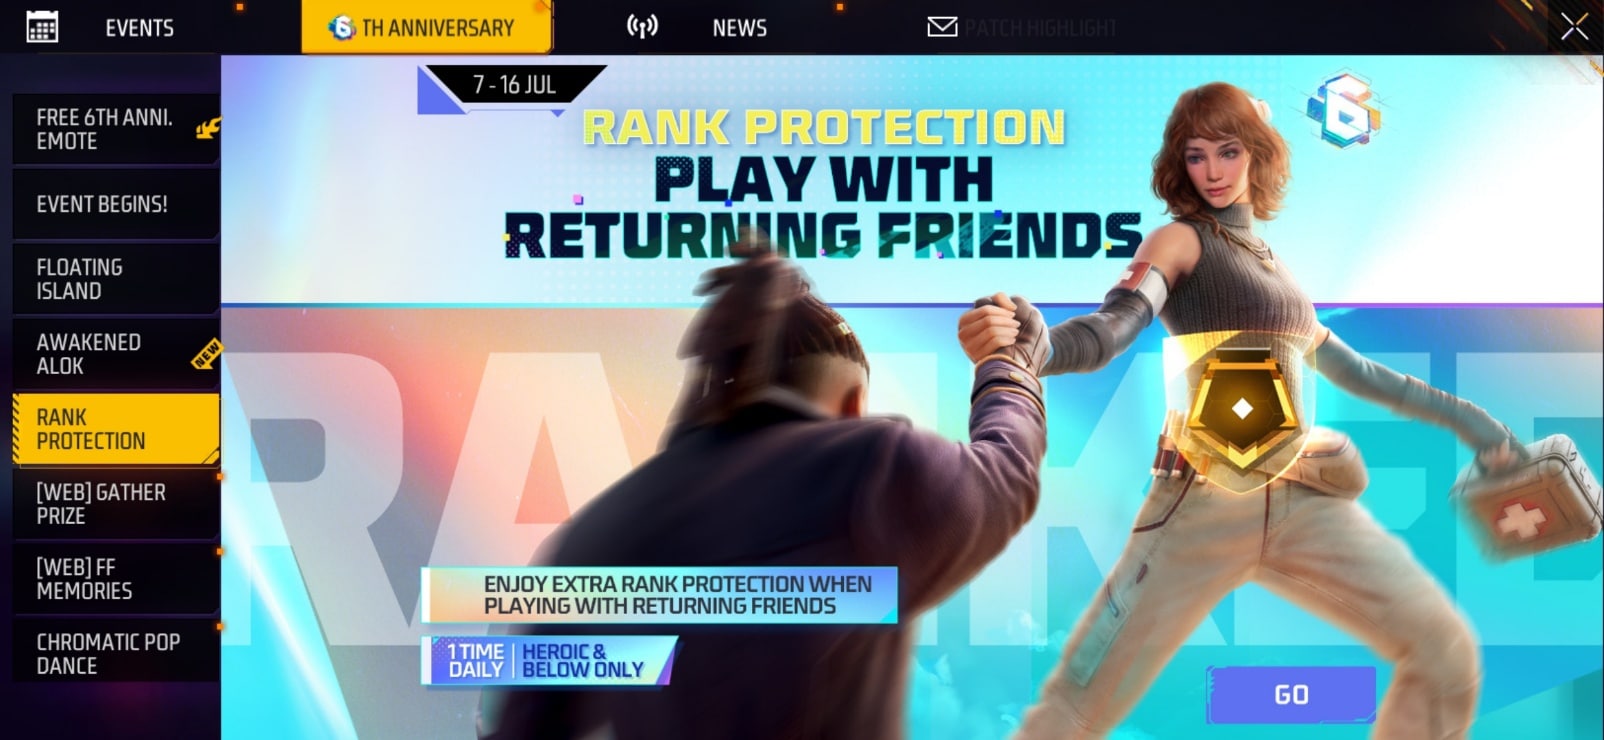 How To Get Rank Protection In Free Fire Max For Free